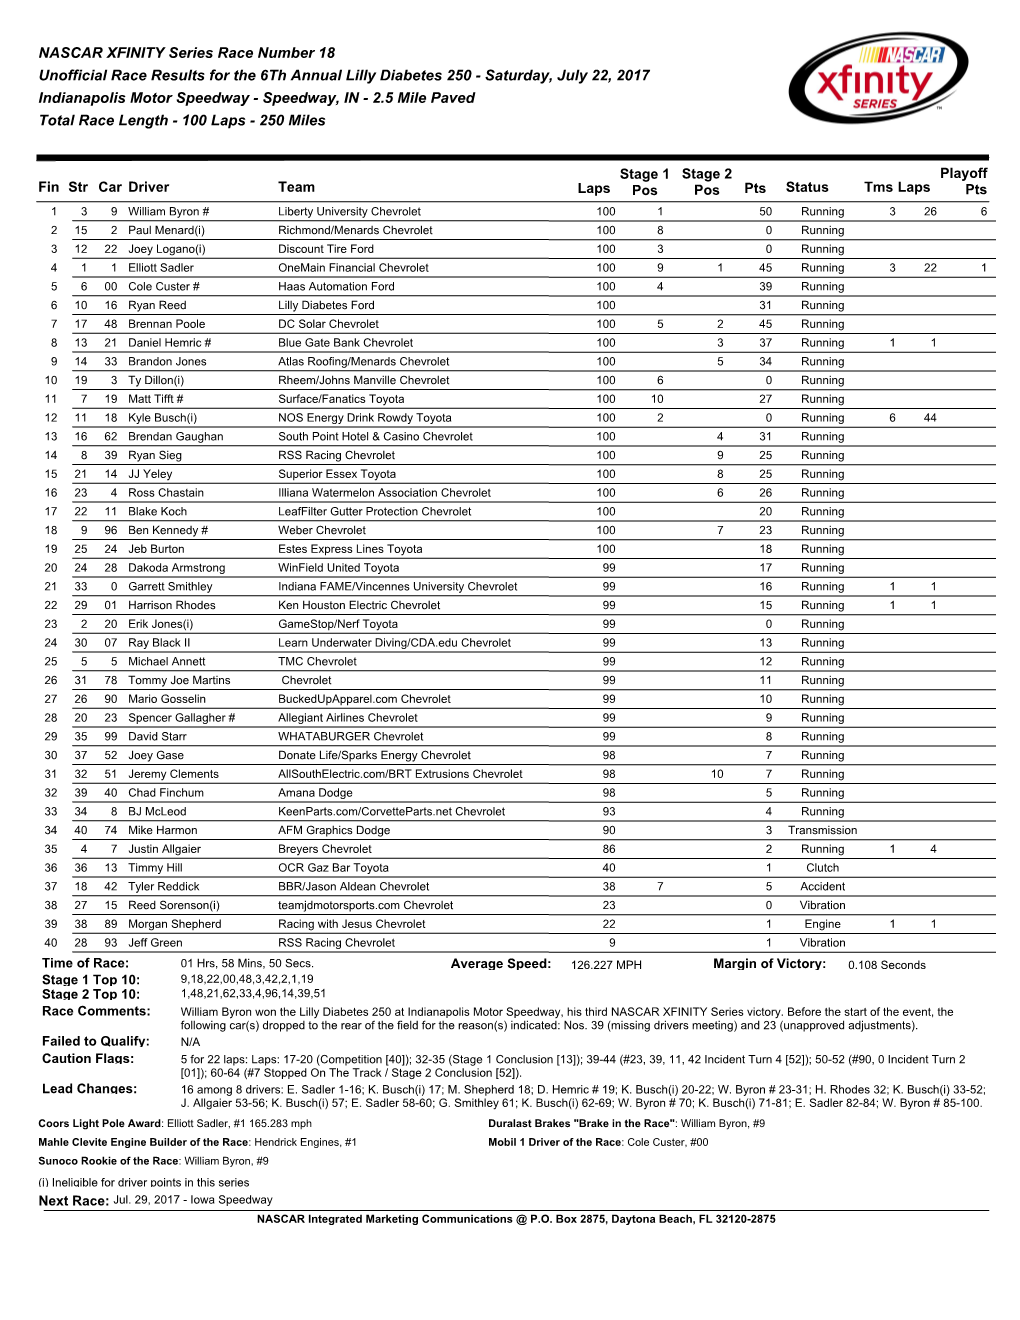 NASCAR XFINITY Series Race Number 18 Unofficial Race Results